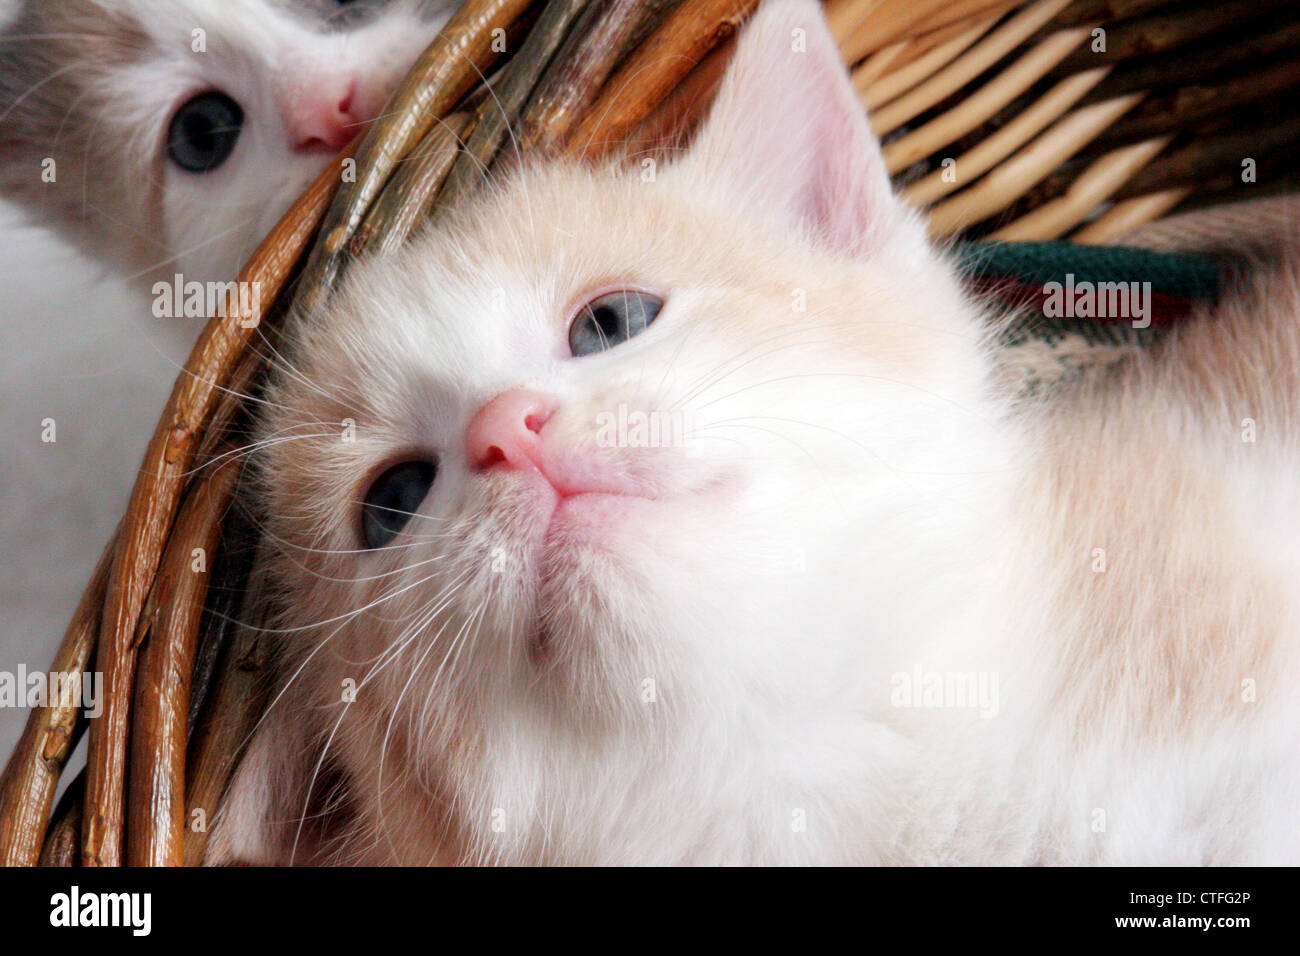 An orange and white kitten in a basket with another kitten looking in the basket Stock Photo